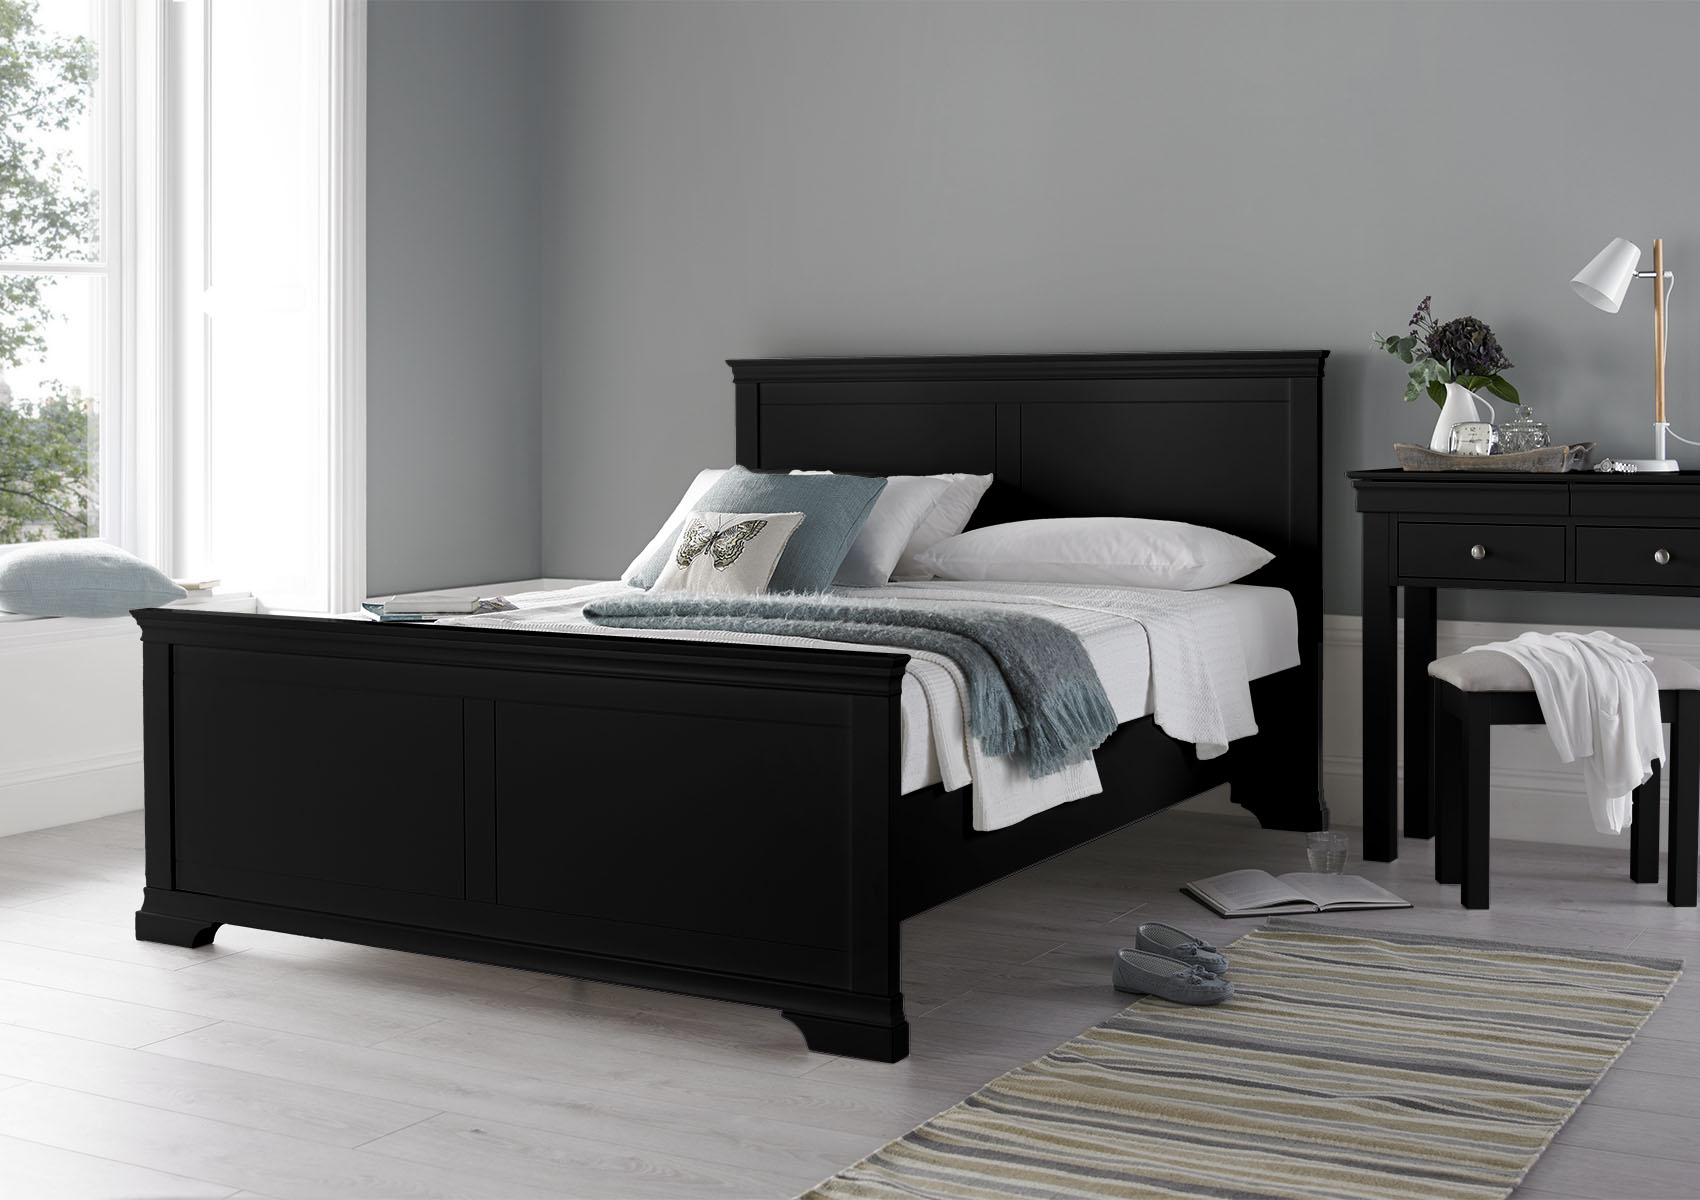 View Chateaux Black Wooden Bed Frame Time4Sleep information